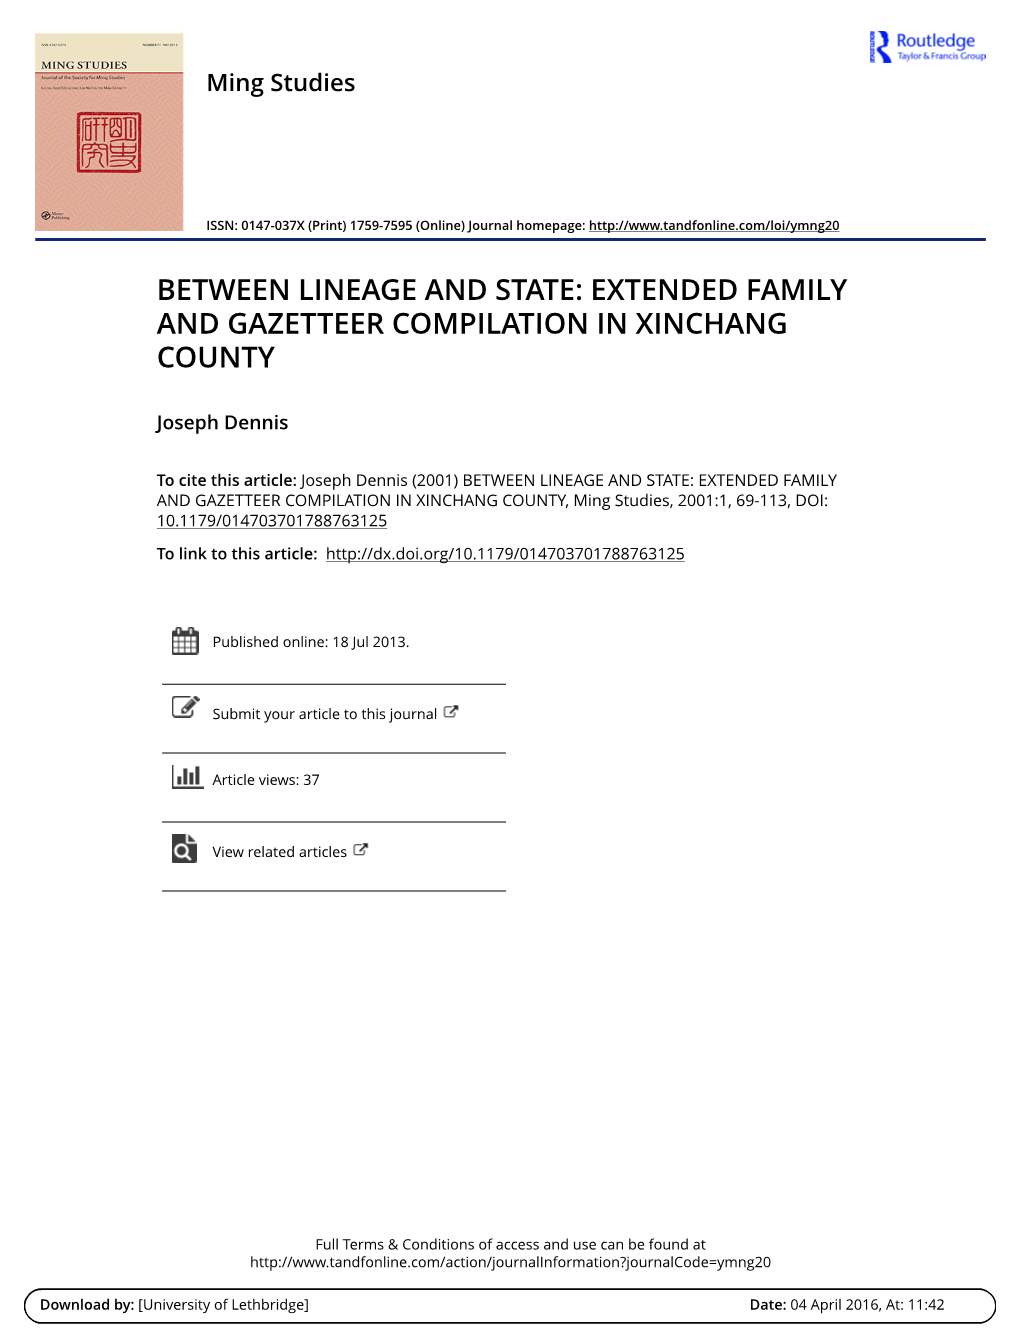 Between Lineage and State: Extended Family and Gazetteer Compilation in Xinchang County